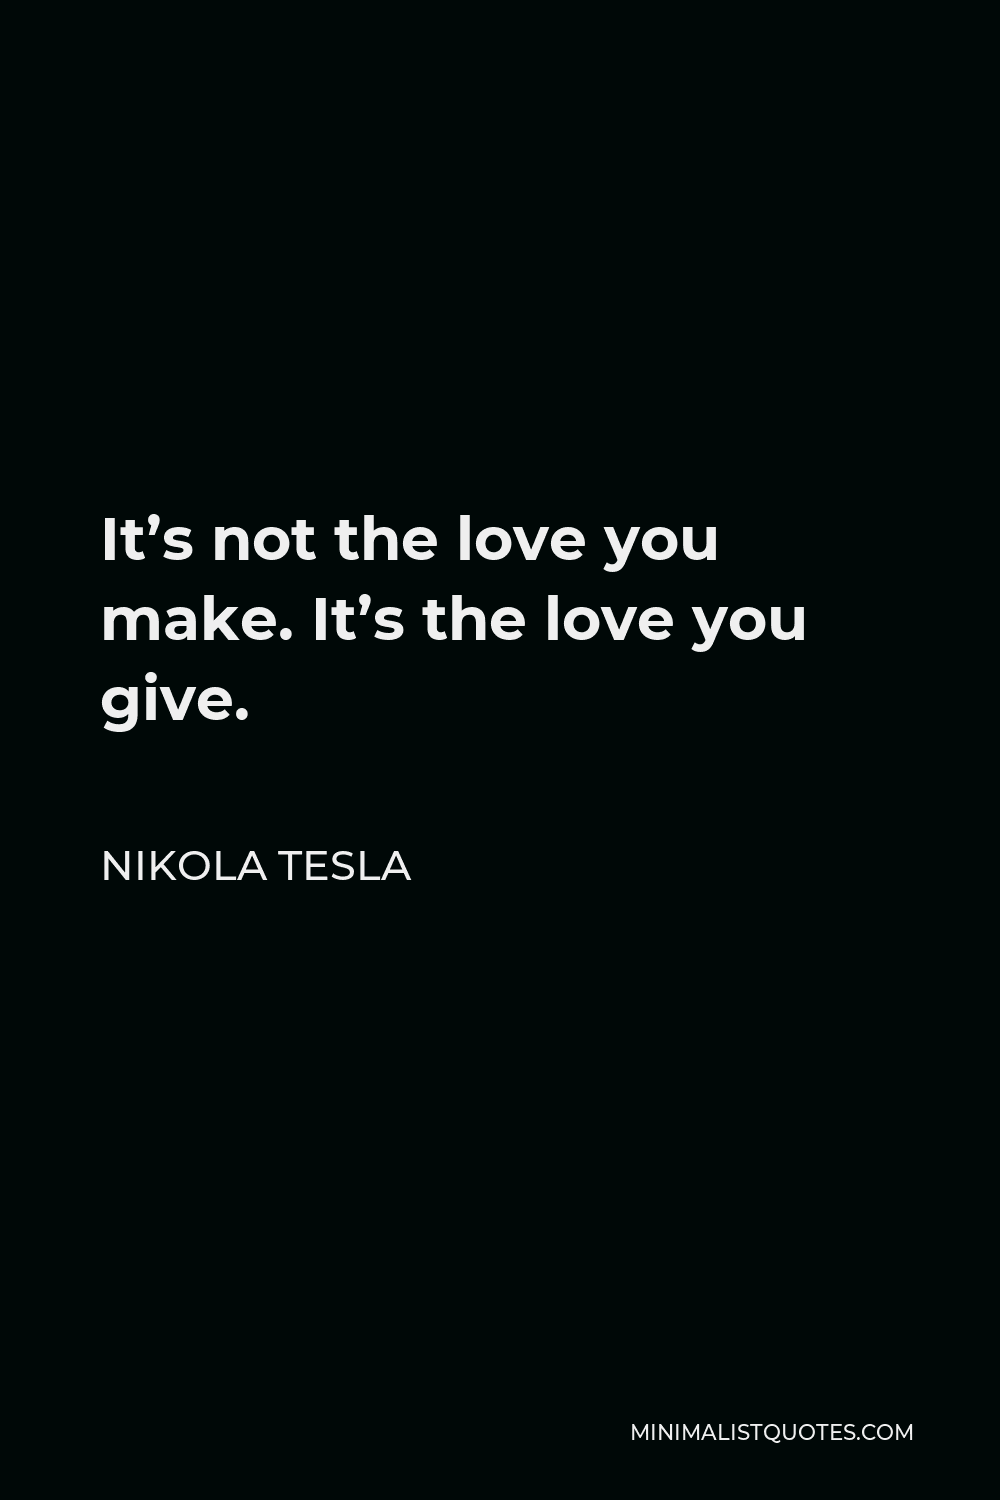 Nikola Tesla Quote - It’s not the love you make. It’s the love you give.